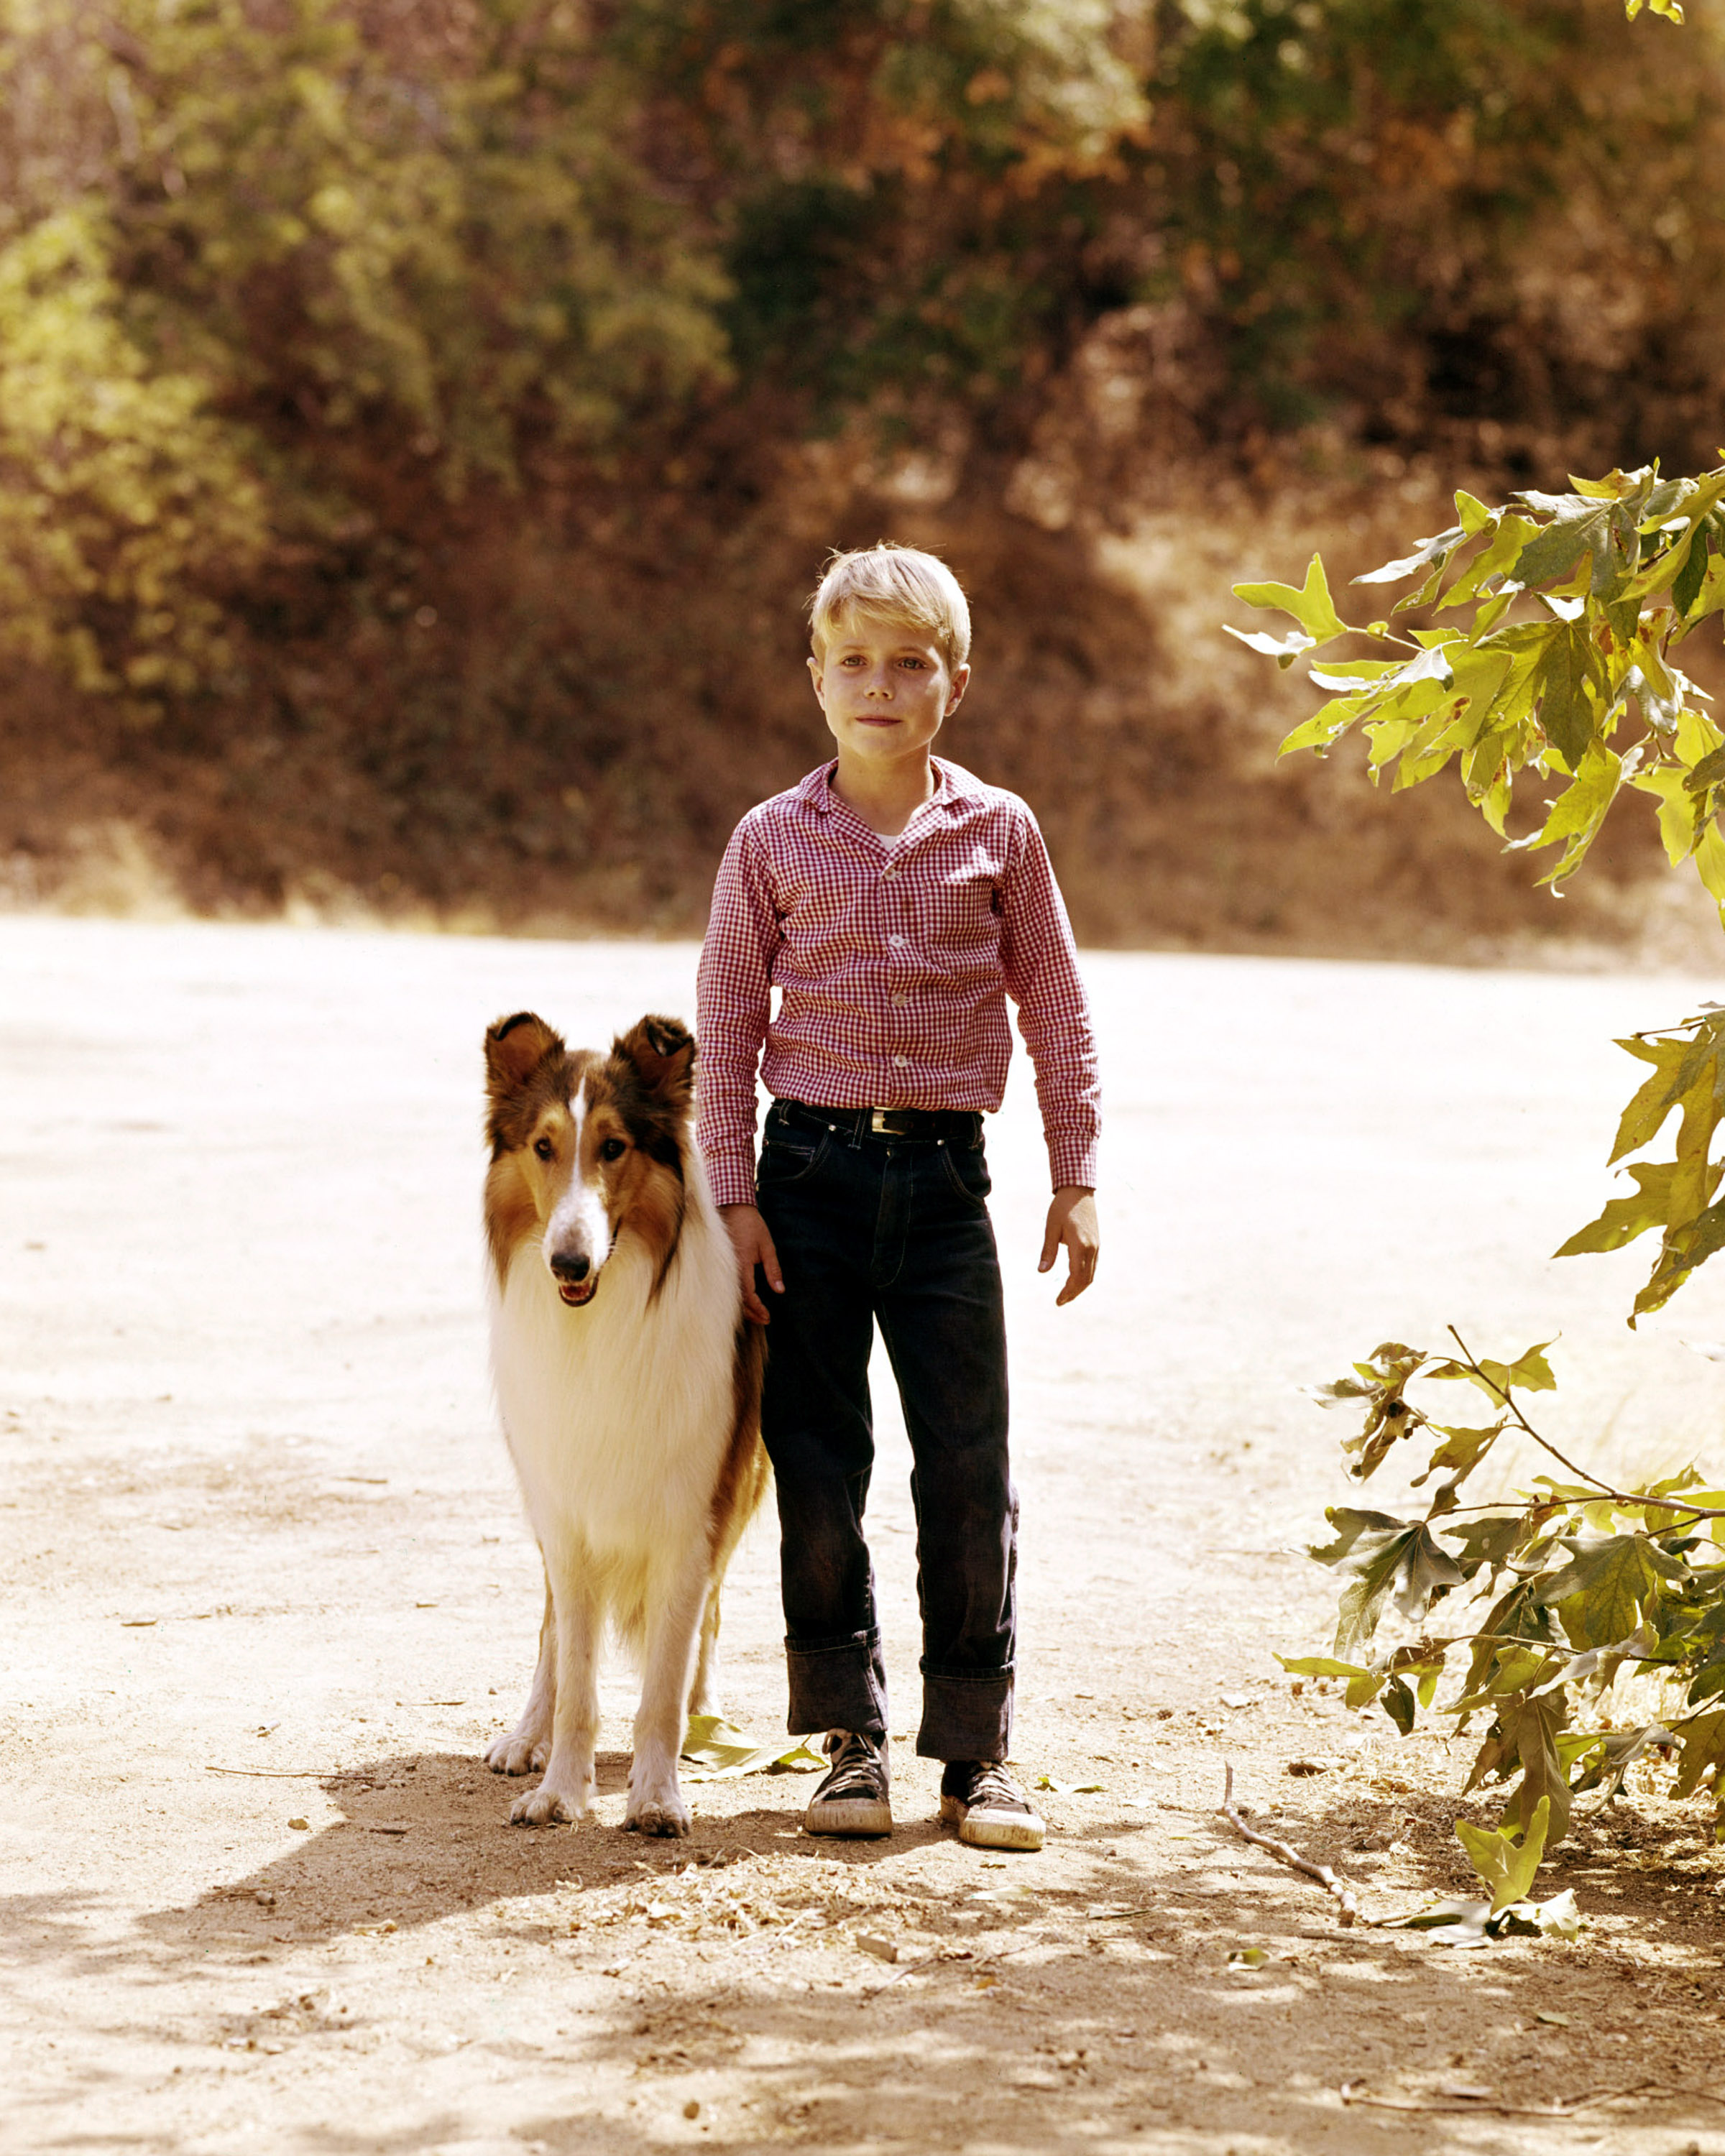 Lassie with Jon Provost in a publicity image for "Lassie," circa 1955 | Source: Getty Images